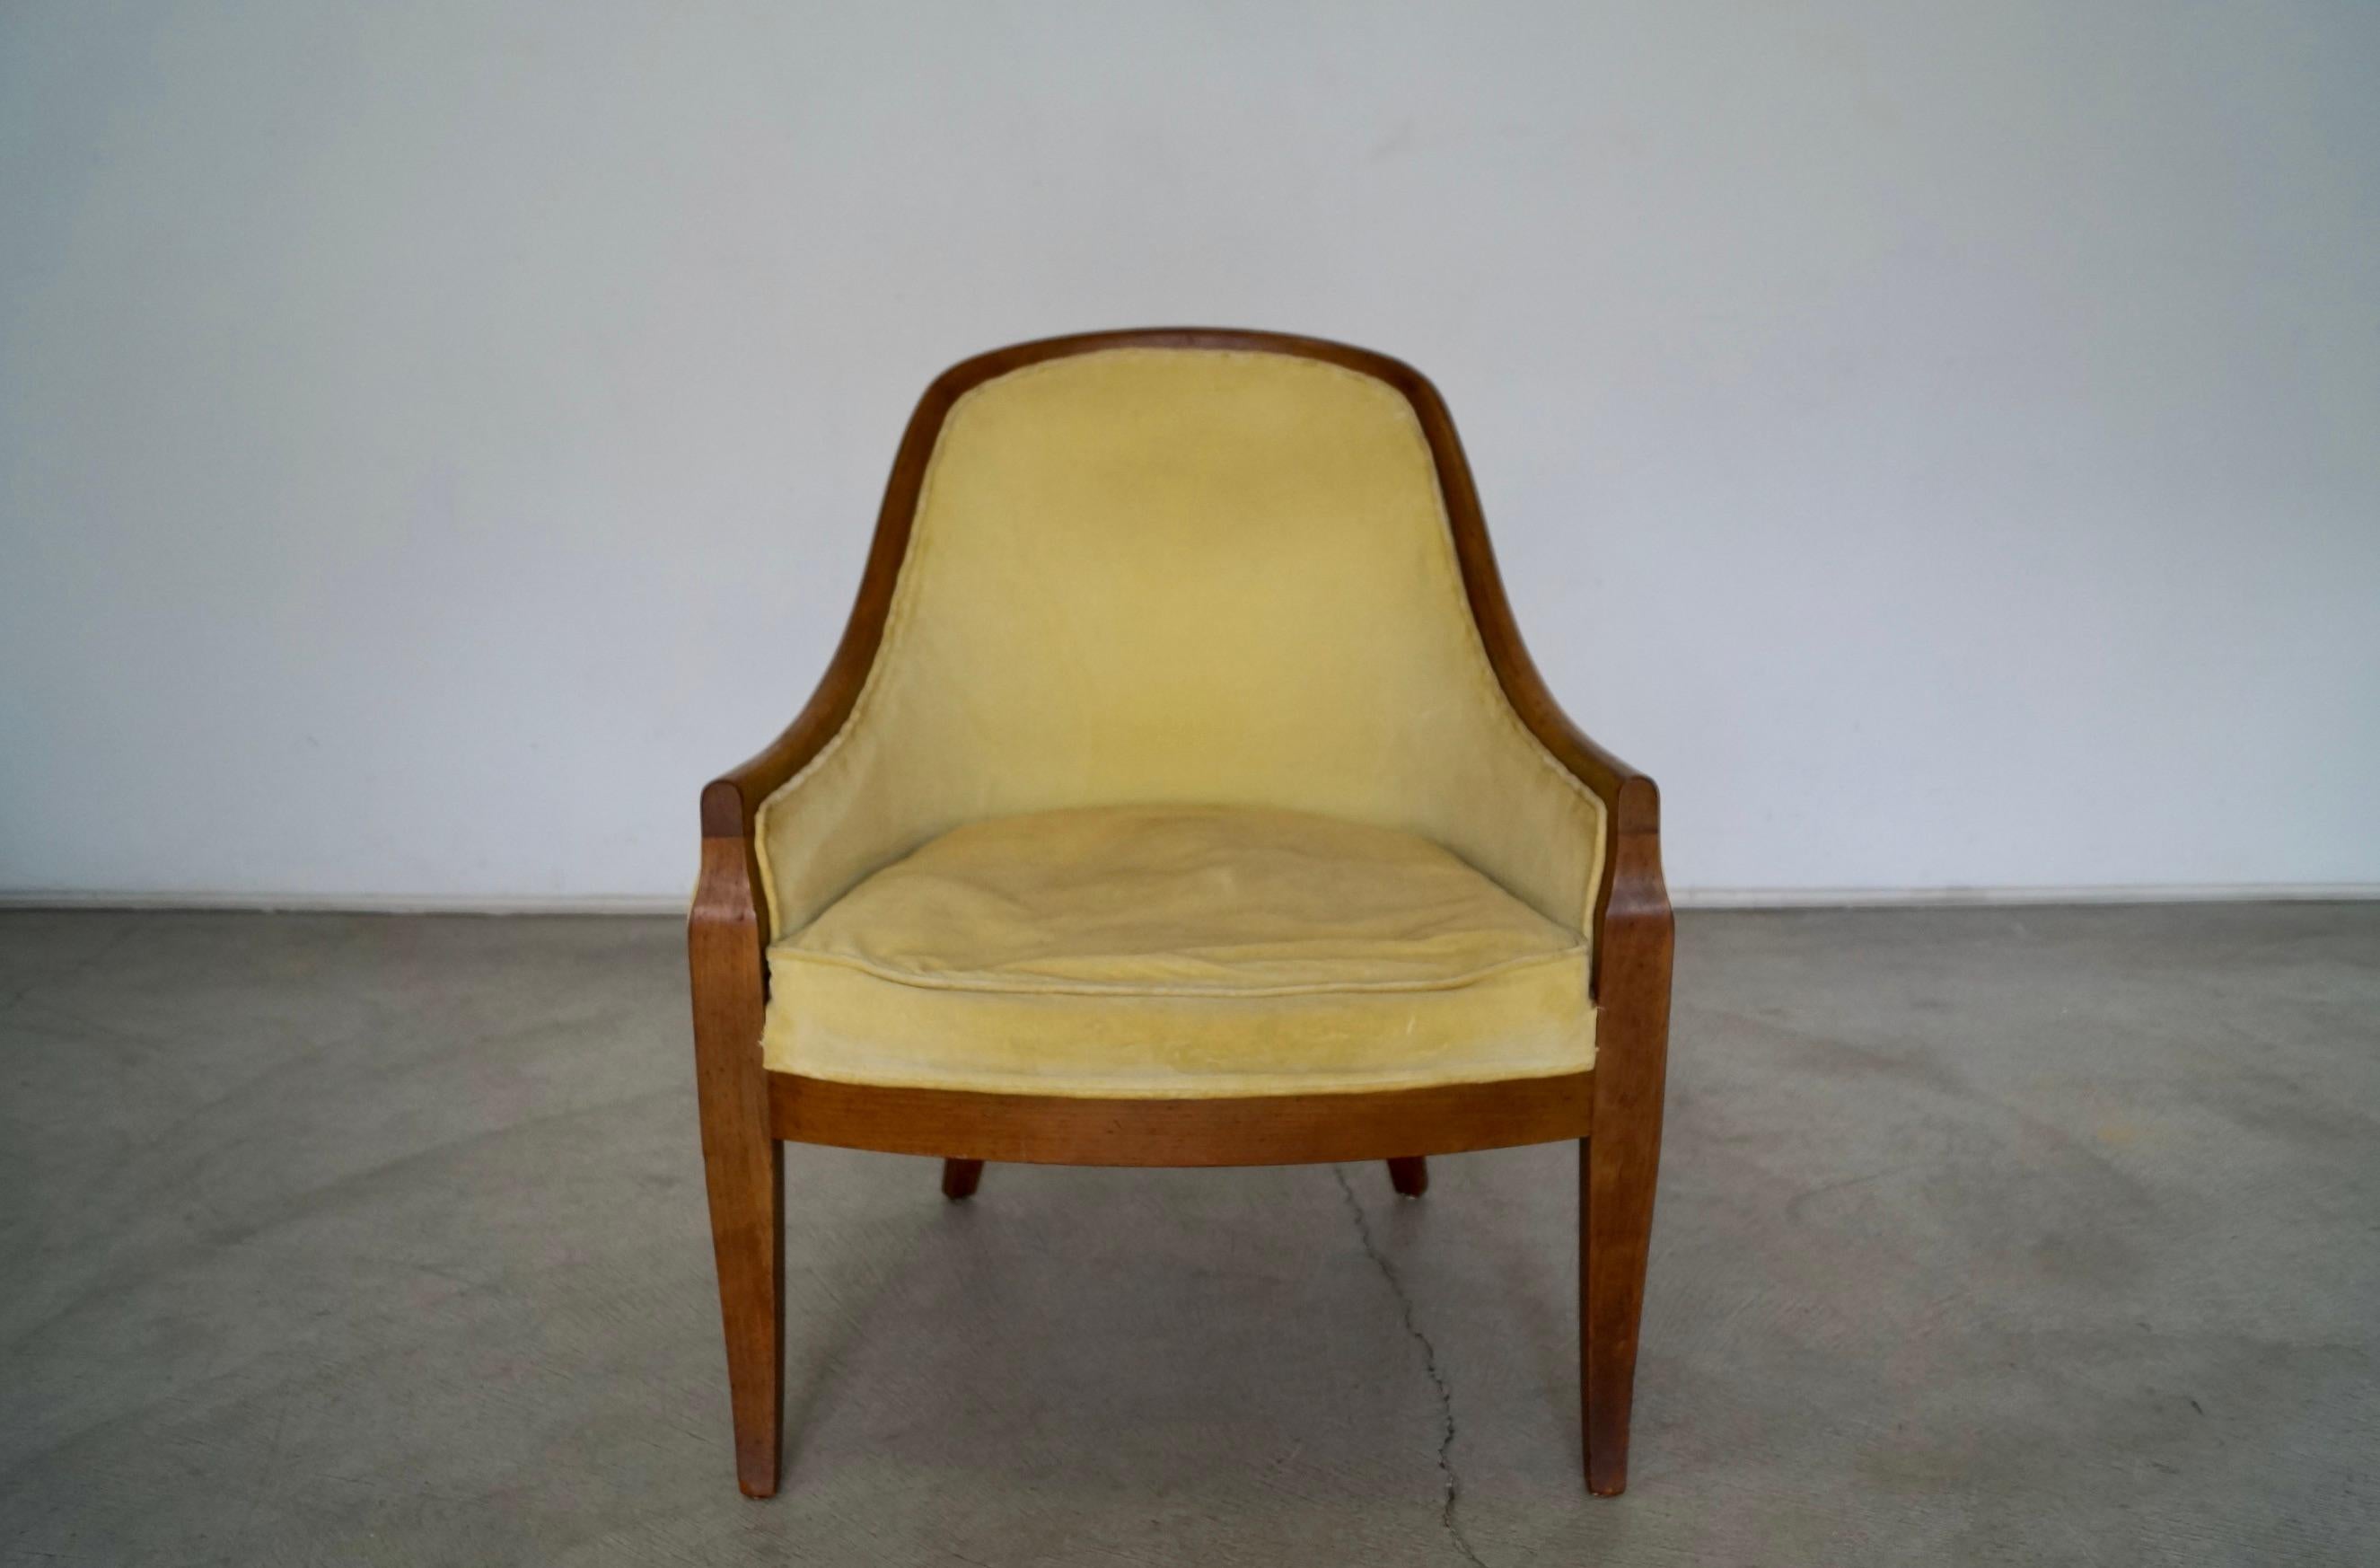 1950's Mid-Century Modern Walnut Trim Armchair In Distressed Condition For Sale In Burbank, CA